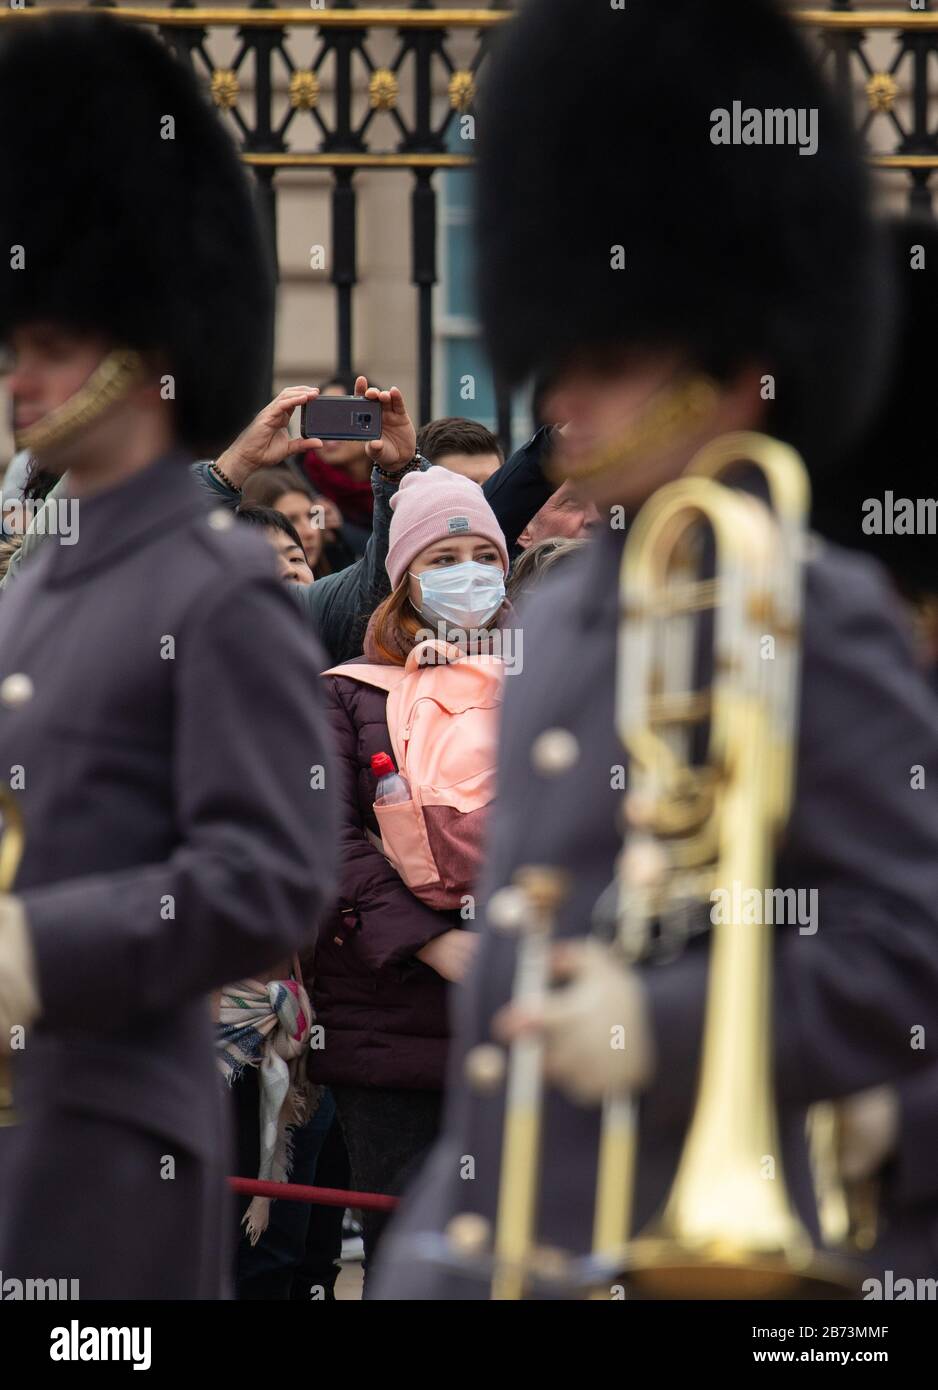 A woman wearing a protective face mask watches the Changing of the Guard ceremony outside Buckingham Palace, London, the day after the Prime Minister said that Covid-19 'is the worst public health crisis for a generation', and the government's top scientist warned that up to 10,000 people in the UK are already infected. PA Photo. Picture date: Friday March 13, 2020. See PA story HEALTH Coronavirus. Photo credit should read: Dominic Lipinski/PA Wire Stock Photo